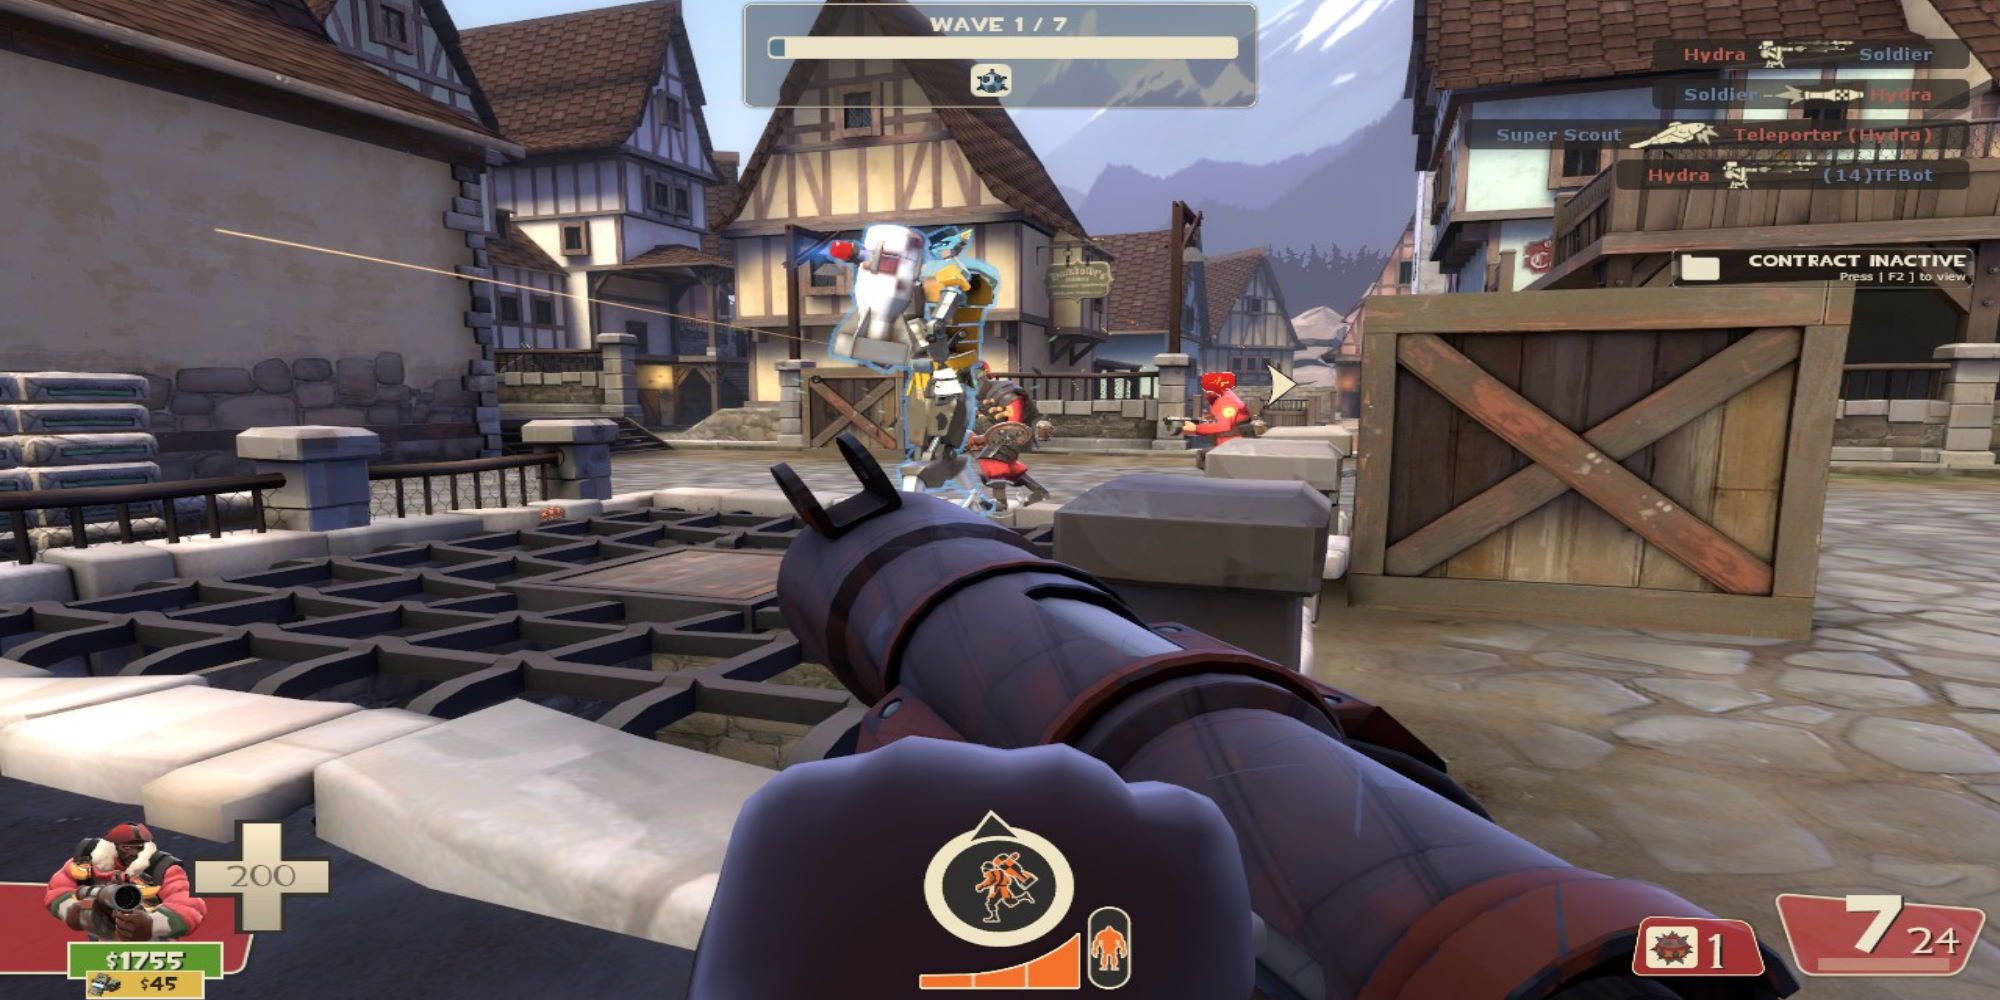 Demoman reloading a Stickybomb Launcher while allied players attack a giant robot carrying a bomb in Team Fortress 2